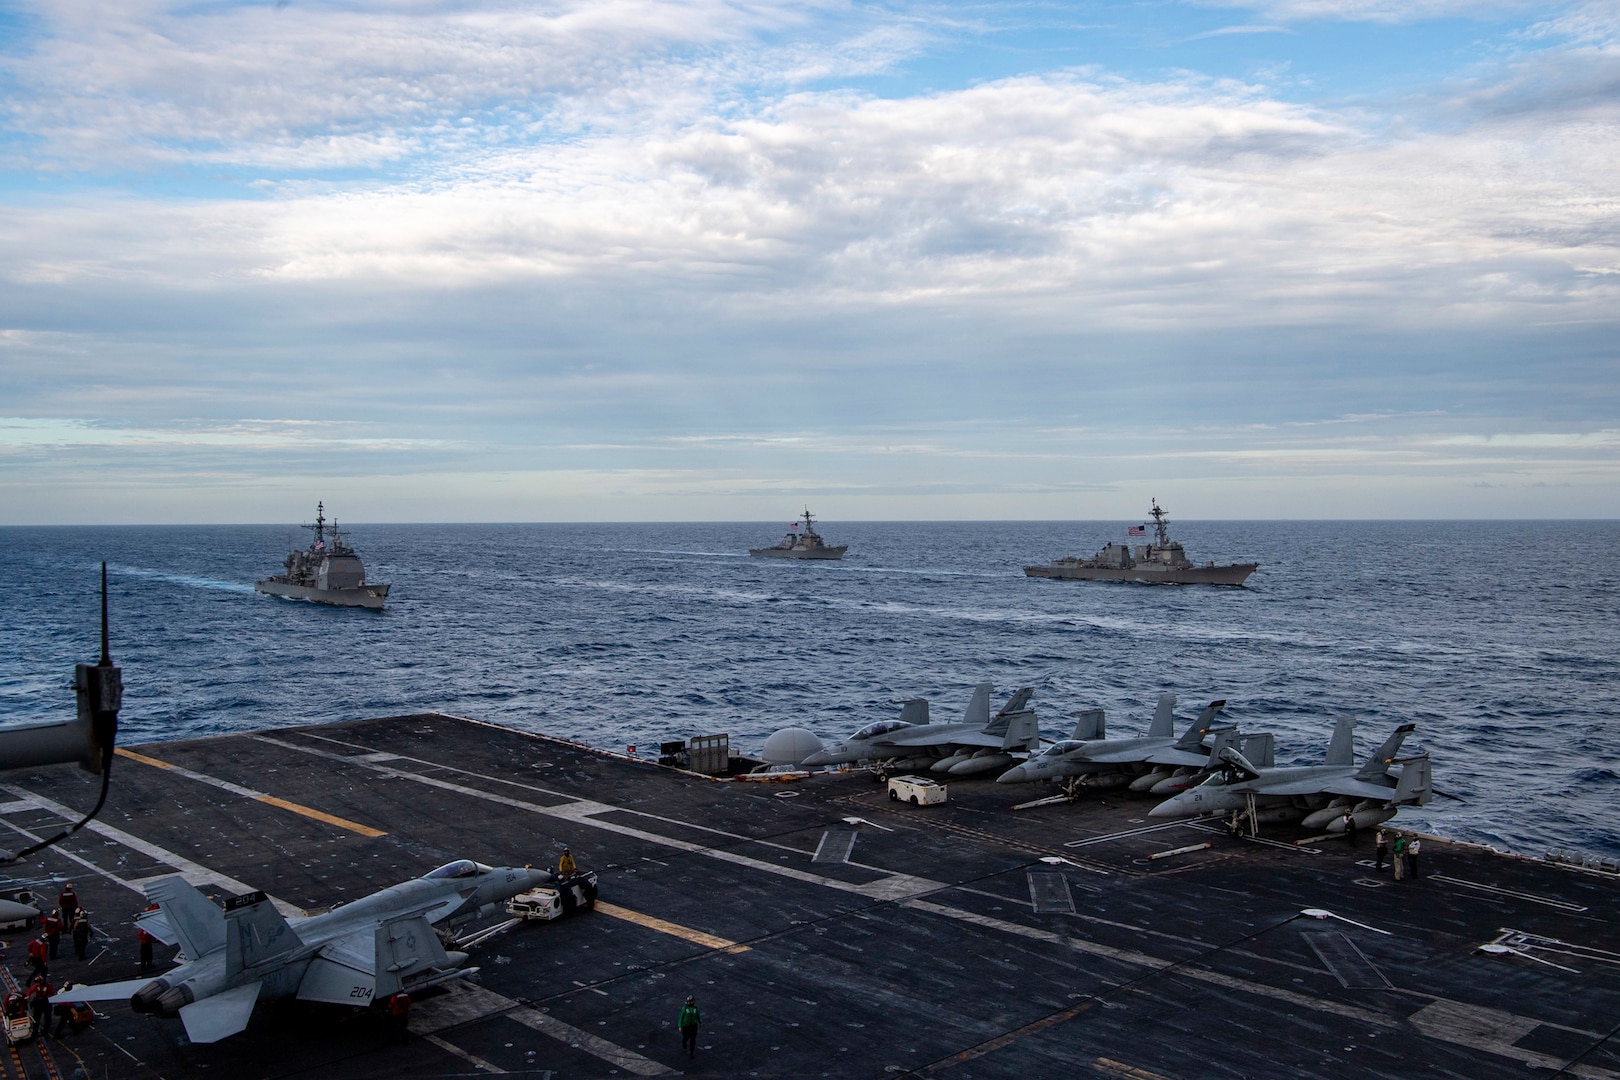 Theodore Roosevelt, Nimitz Carrier Strike Groups conduct dual carrier operations